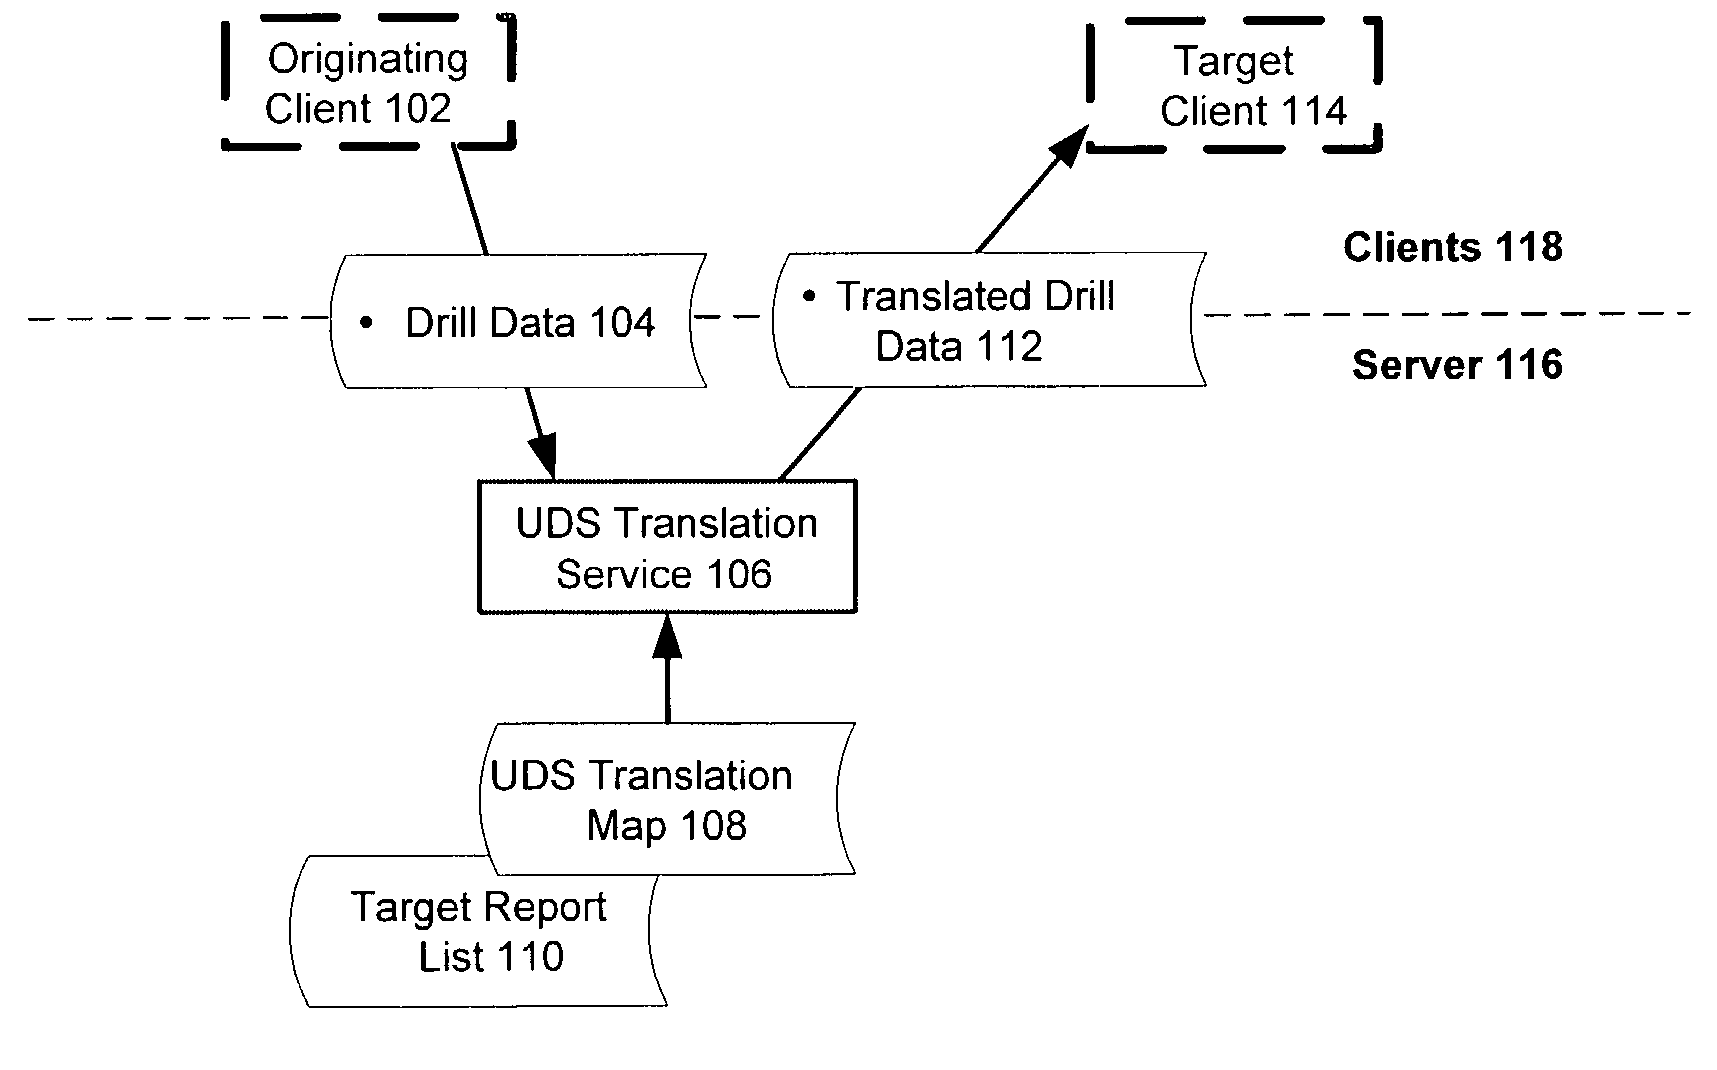 Universal drill-down system for coordinated presentation of items in different databases